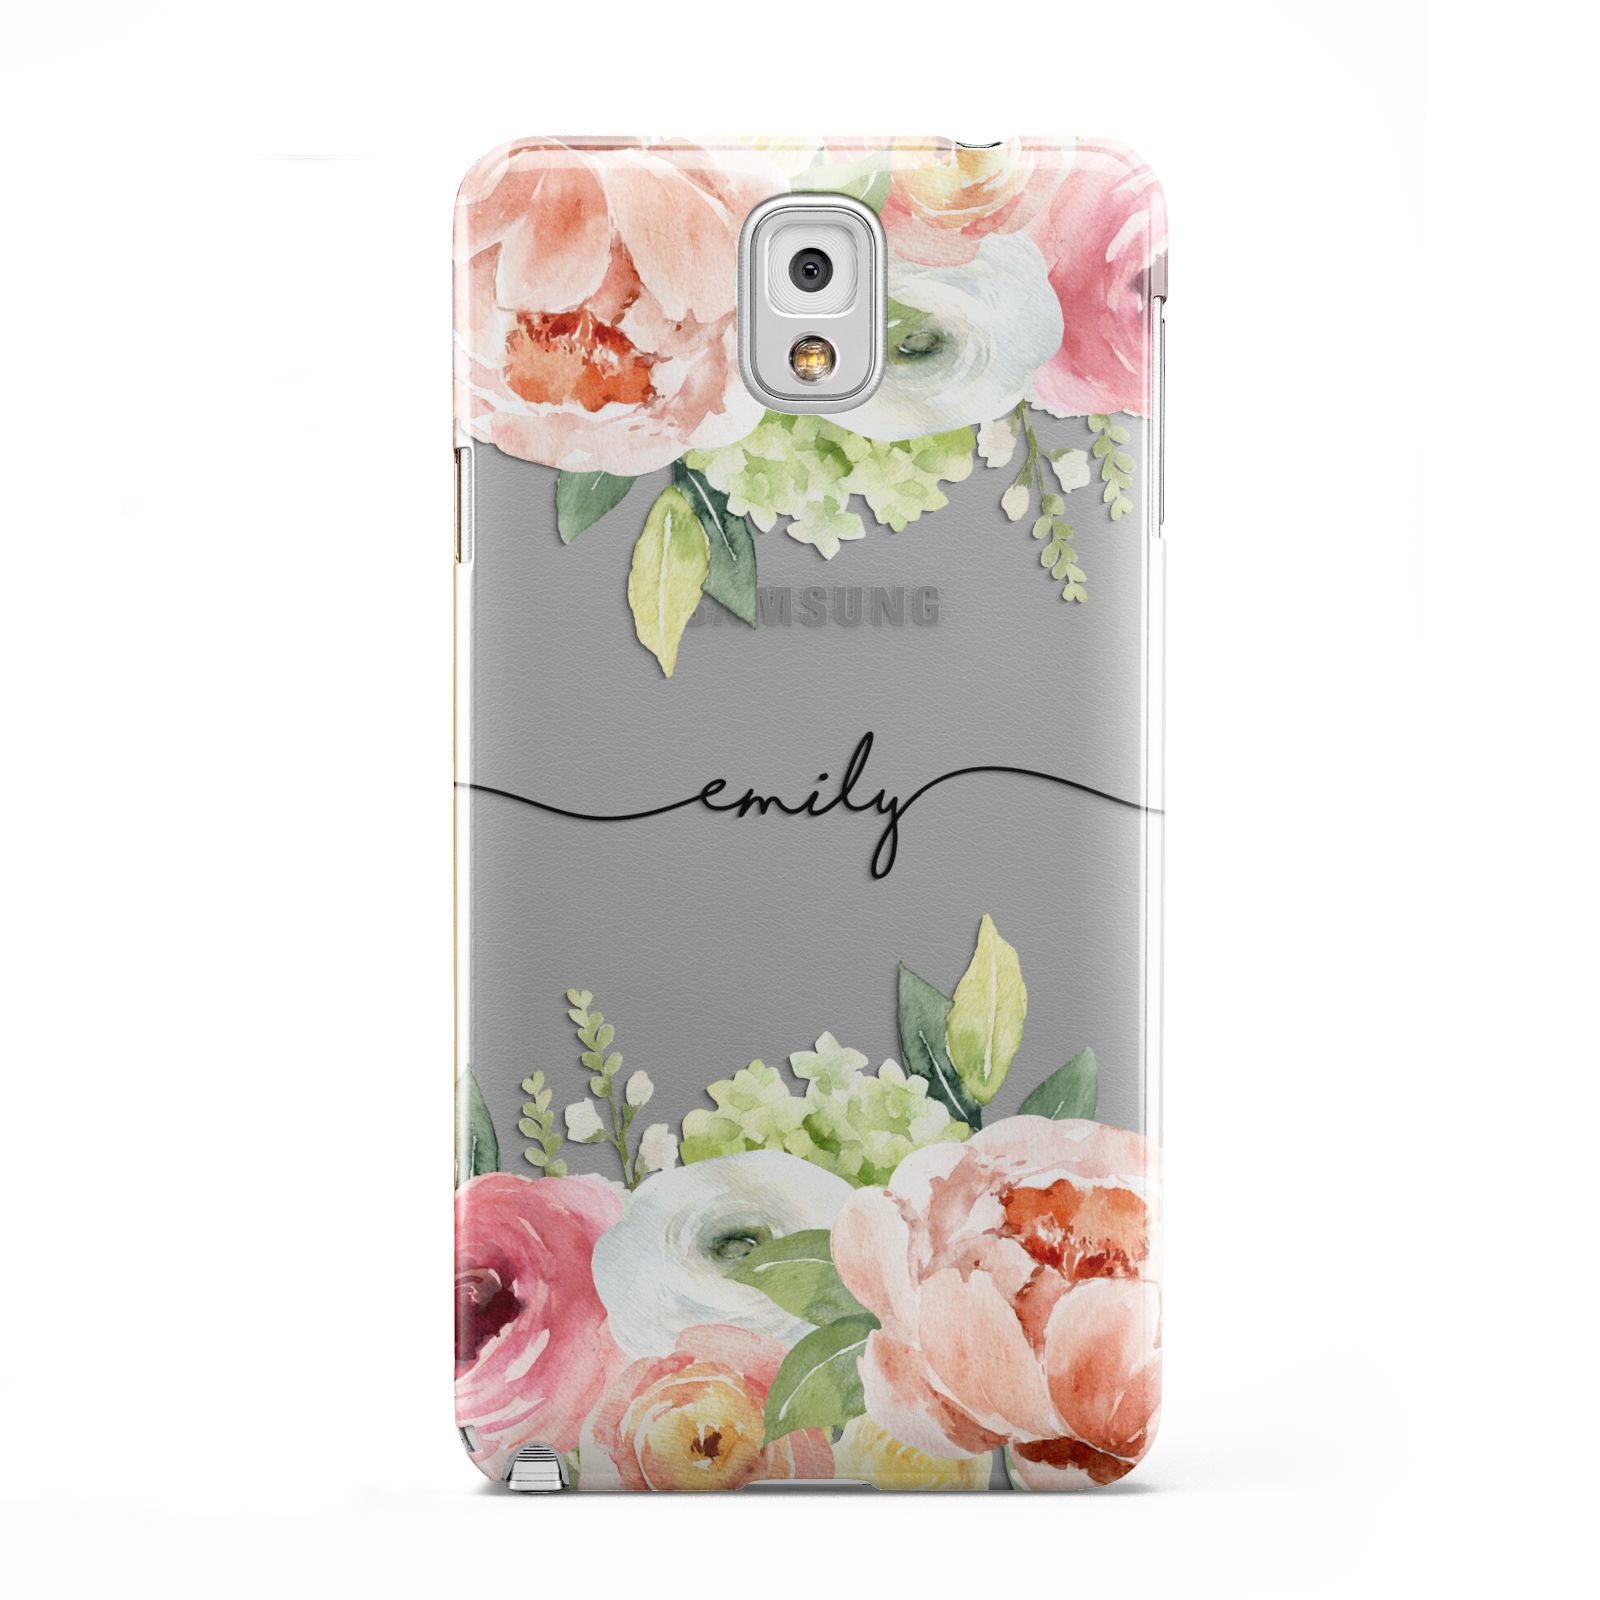 Personalised Flowers Samsung Galaxy Note 3 Case